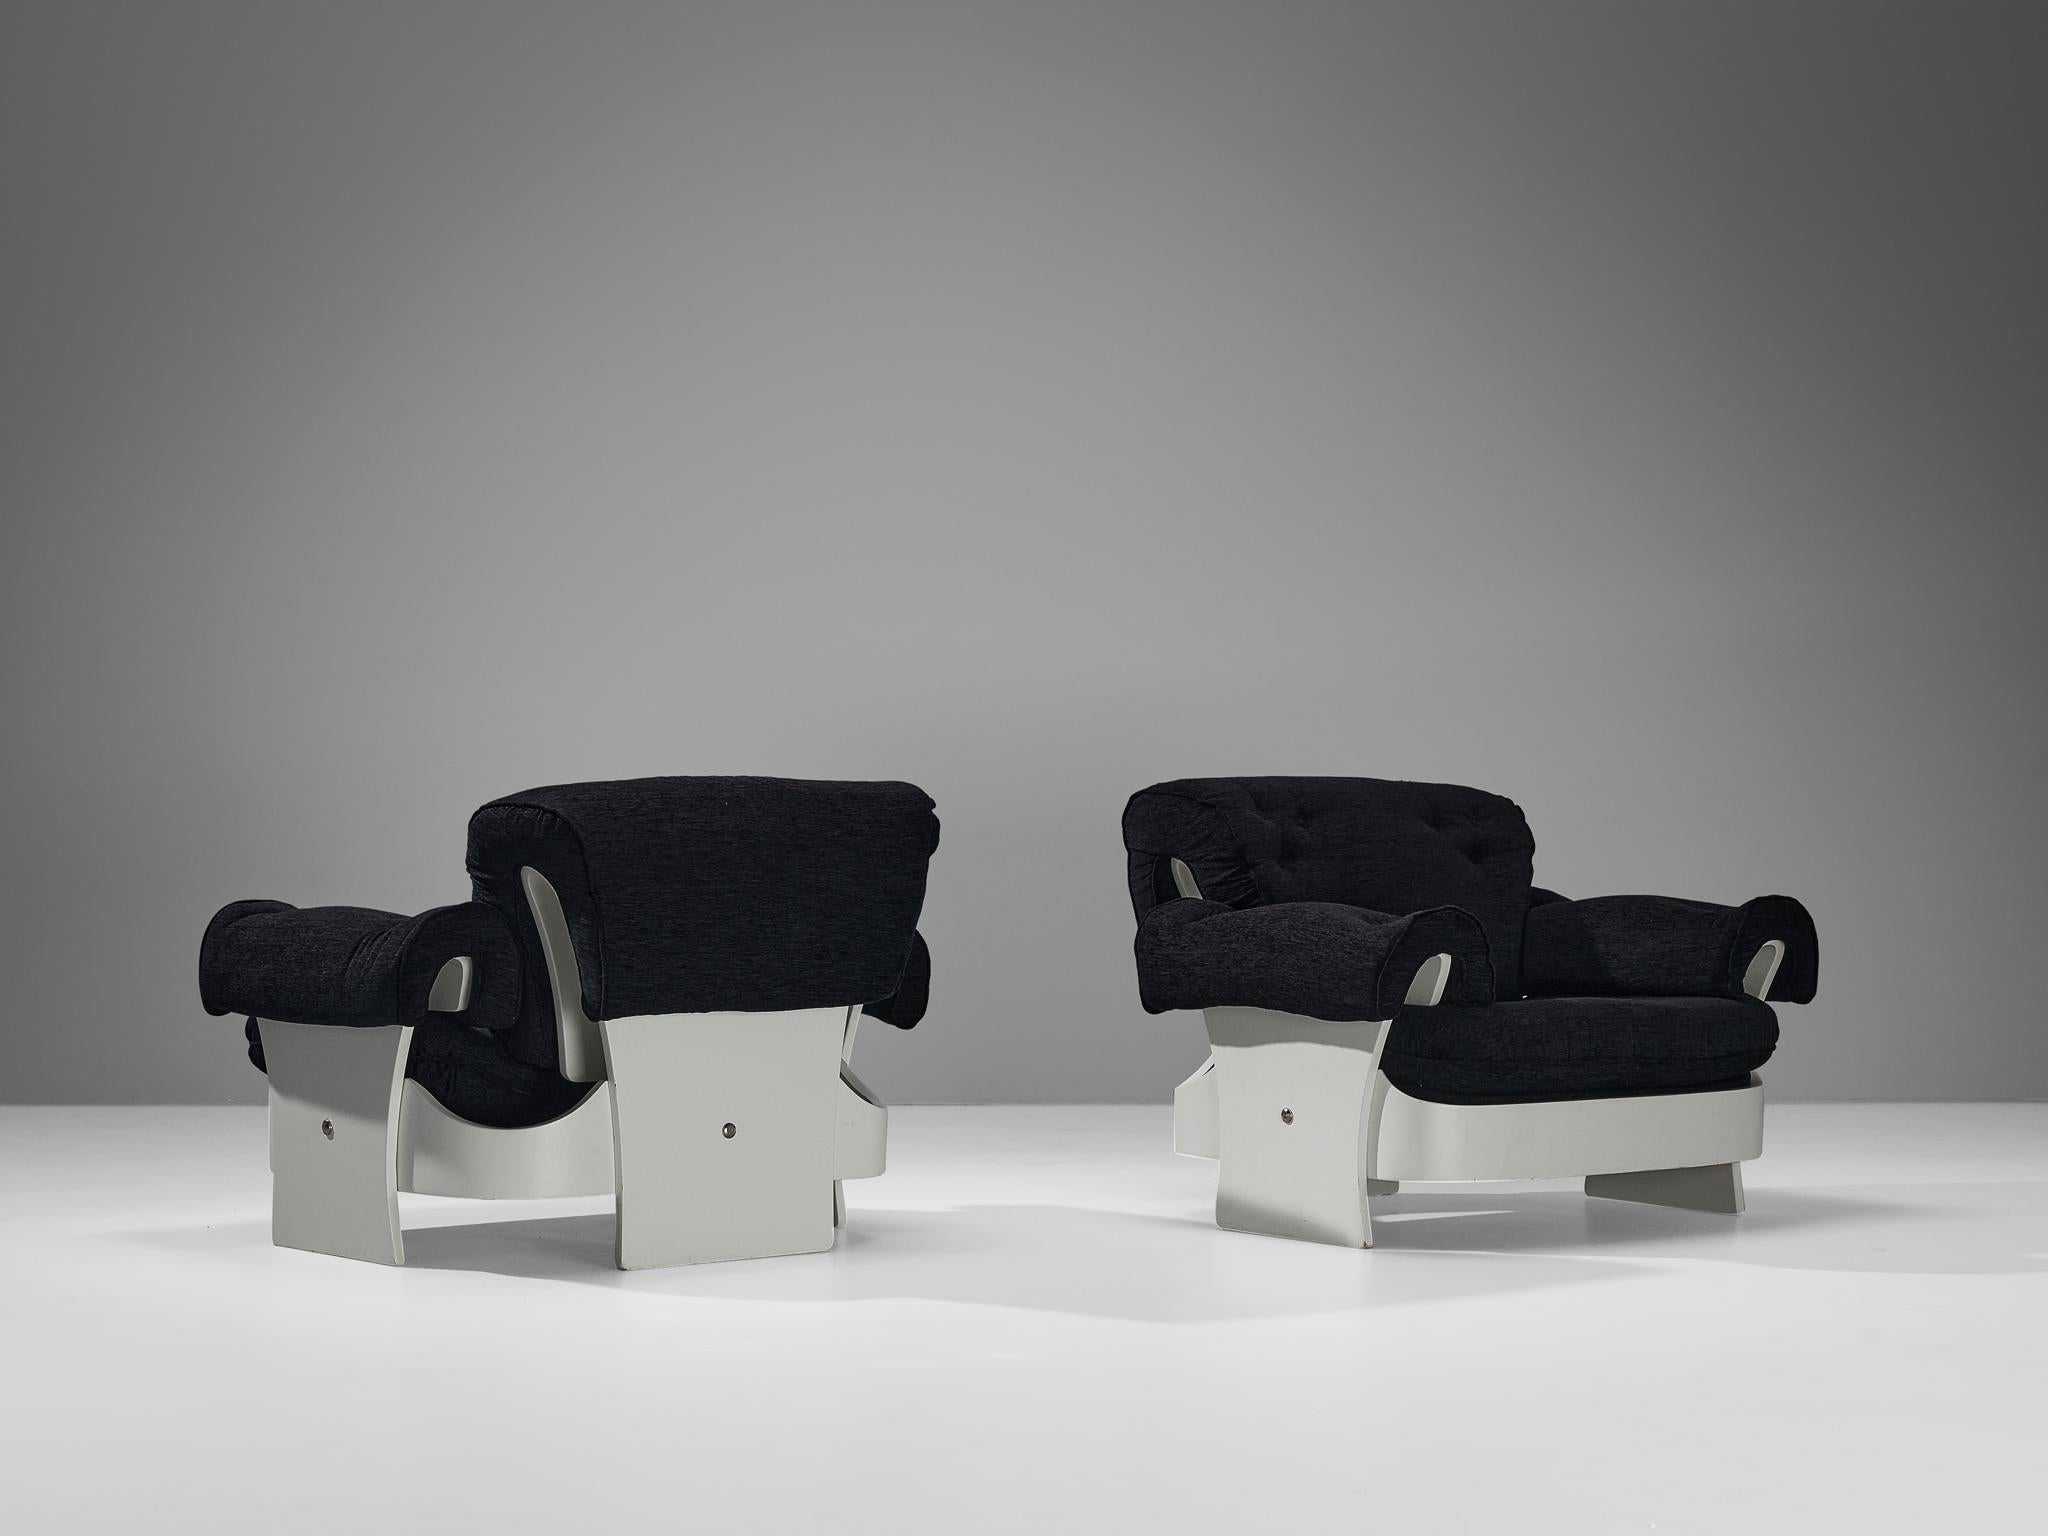 Pair of lounge chairs, plywood, fabric, Italy, 1970s

Pair of armchairs composed of white lacquered wood. The chairs are build up from a square base with rounded edges and three large legs, one in the back and one at each side. The wooden parts